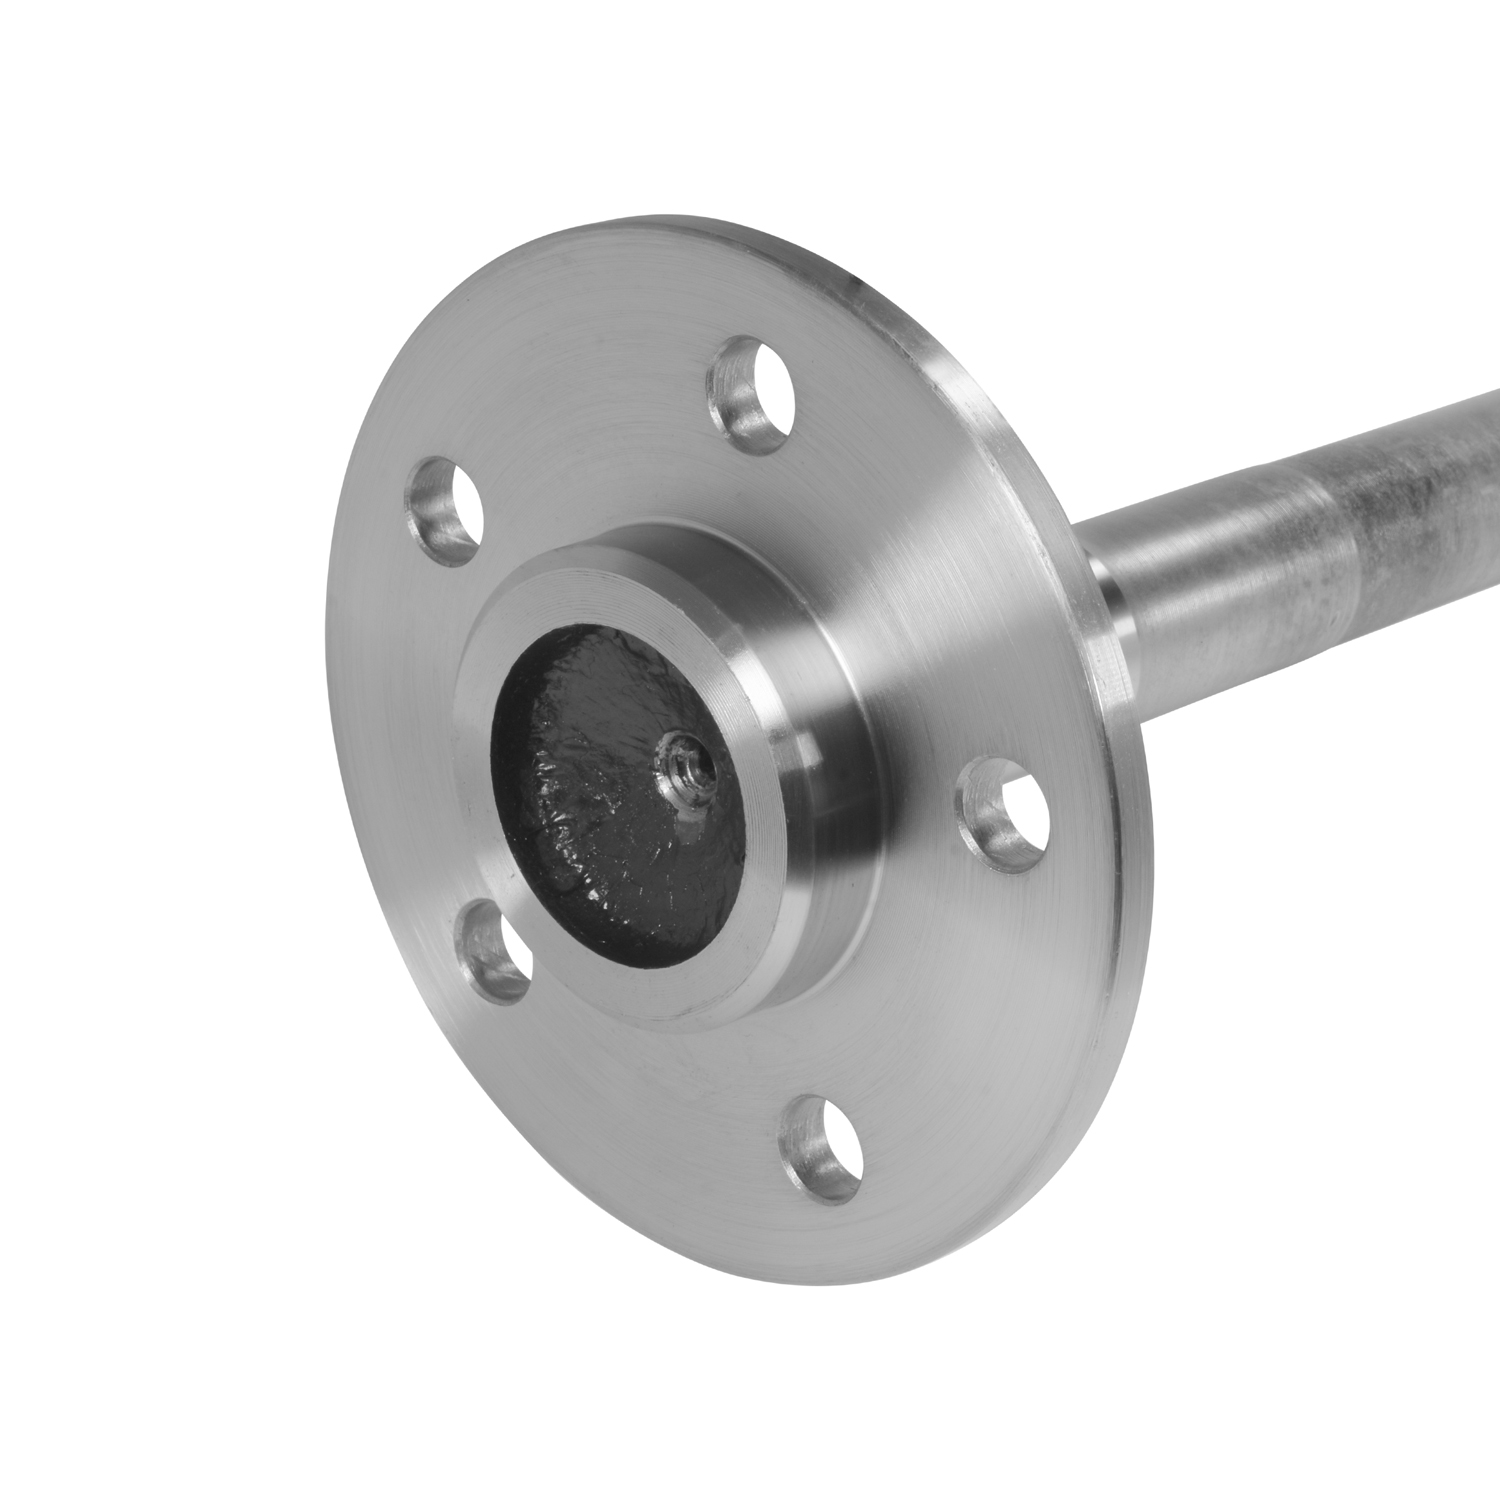 Axle for '98-'02 Crown Victoria. Ford 8.8", 28 splines, 32 7/16" long.